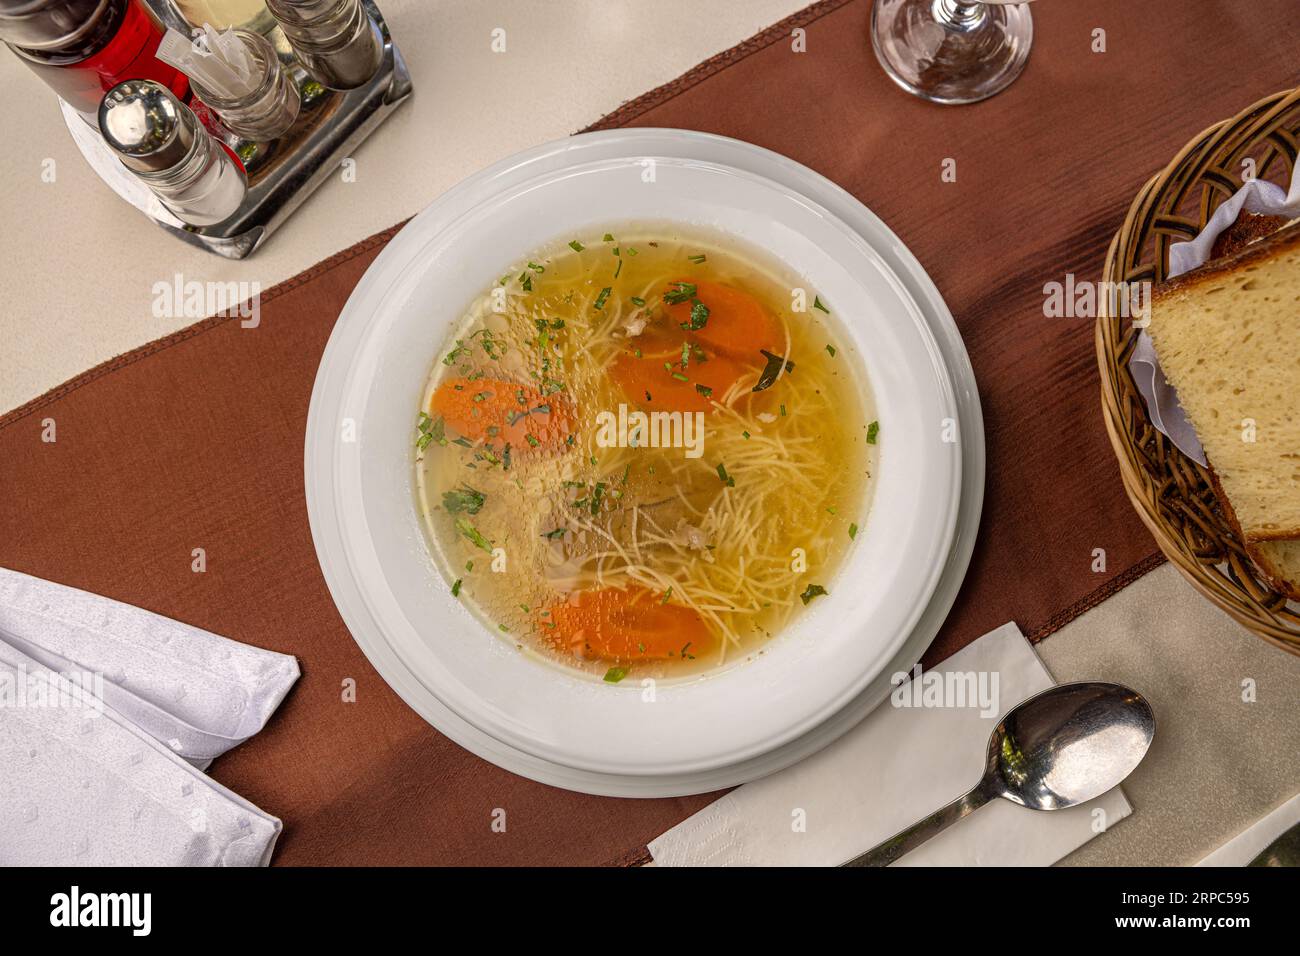 Top view of chicken noodle soup with carrots Stock Photo